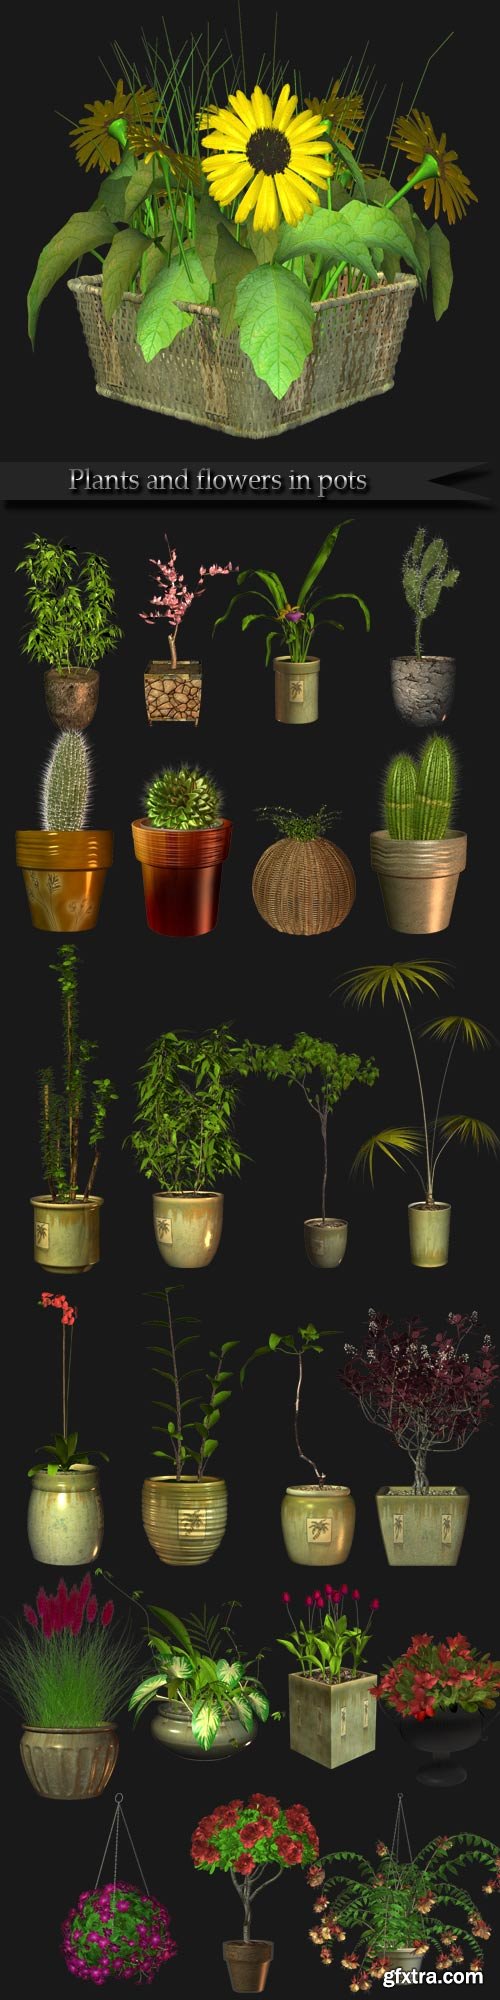 Plants and flowers in pots